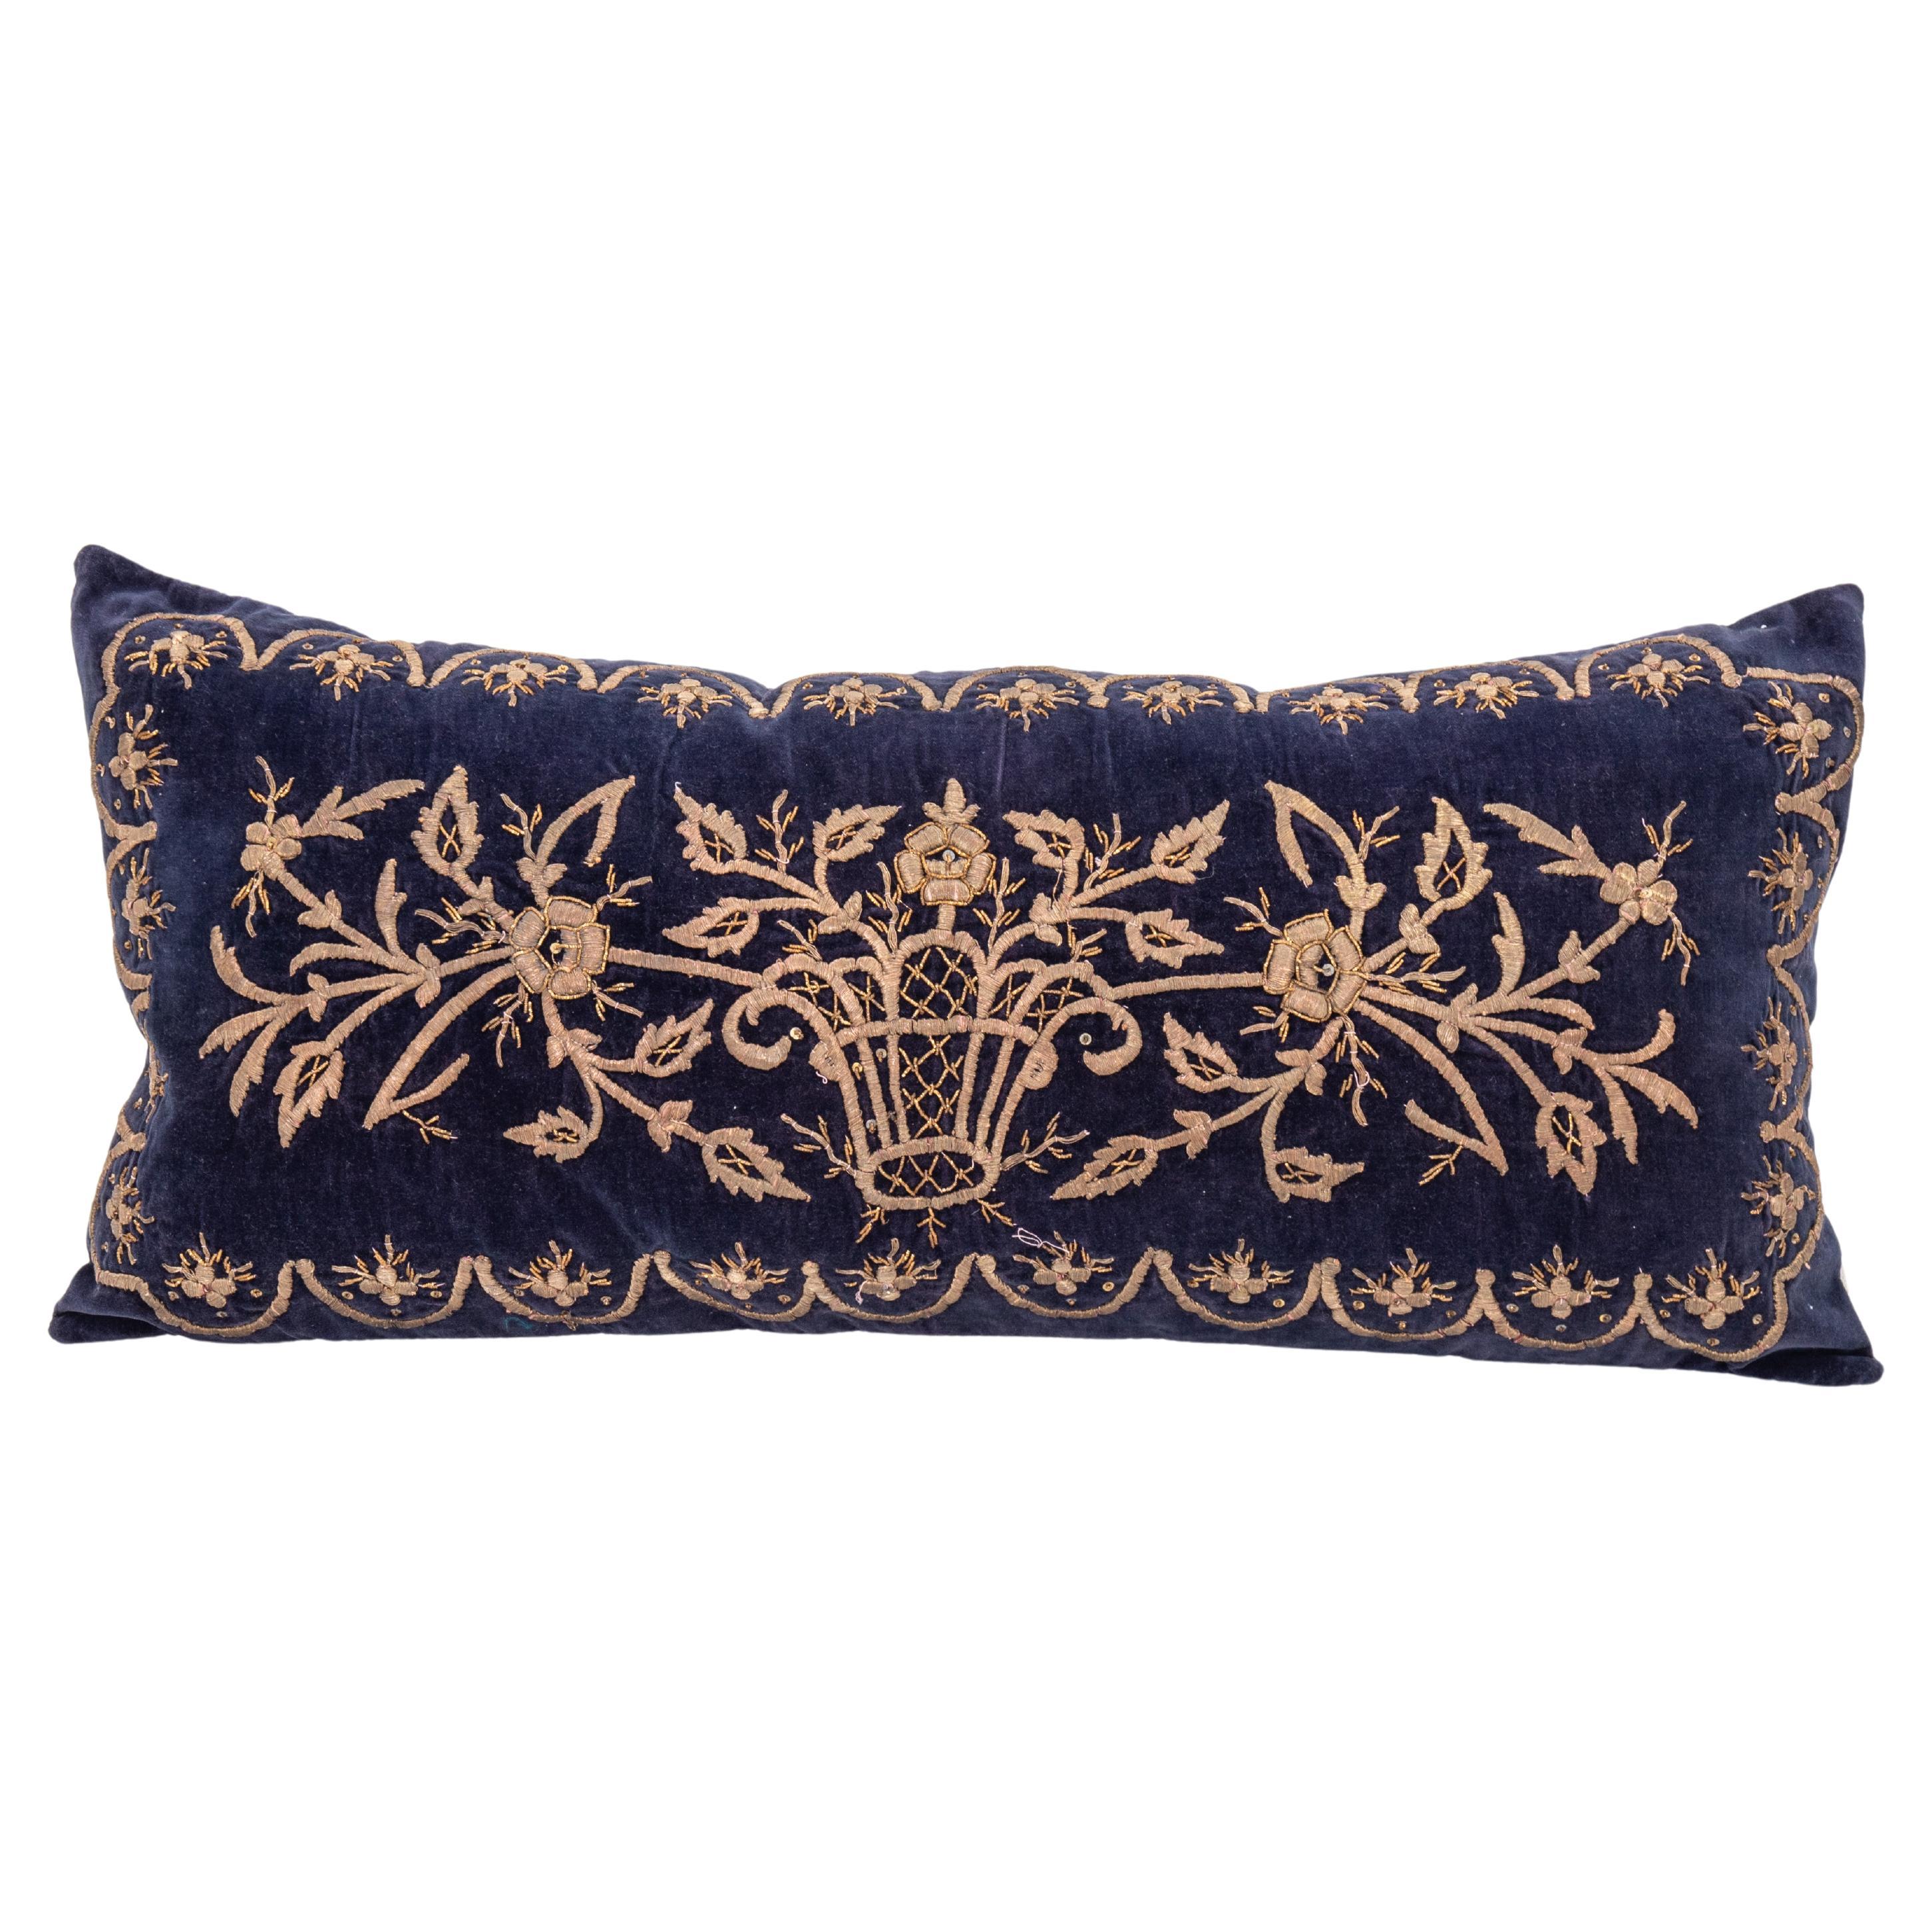 Ottoman / Turkish Pillow Cover in Sarma Technique, late 19th / Early 20th C. For Sale